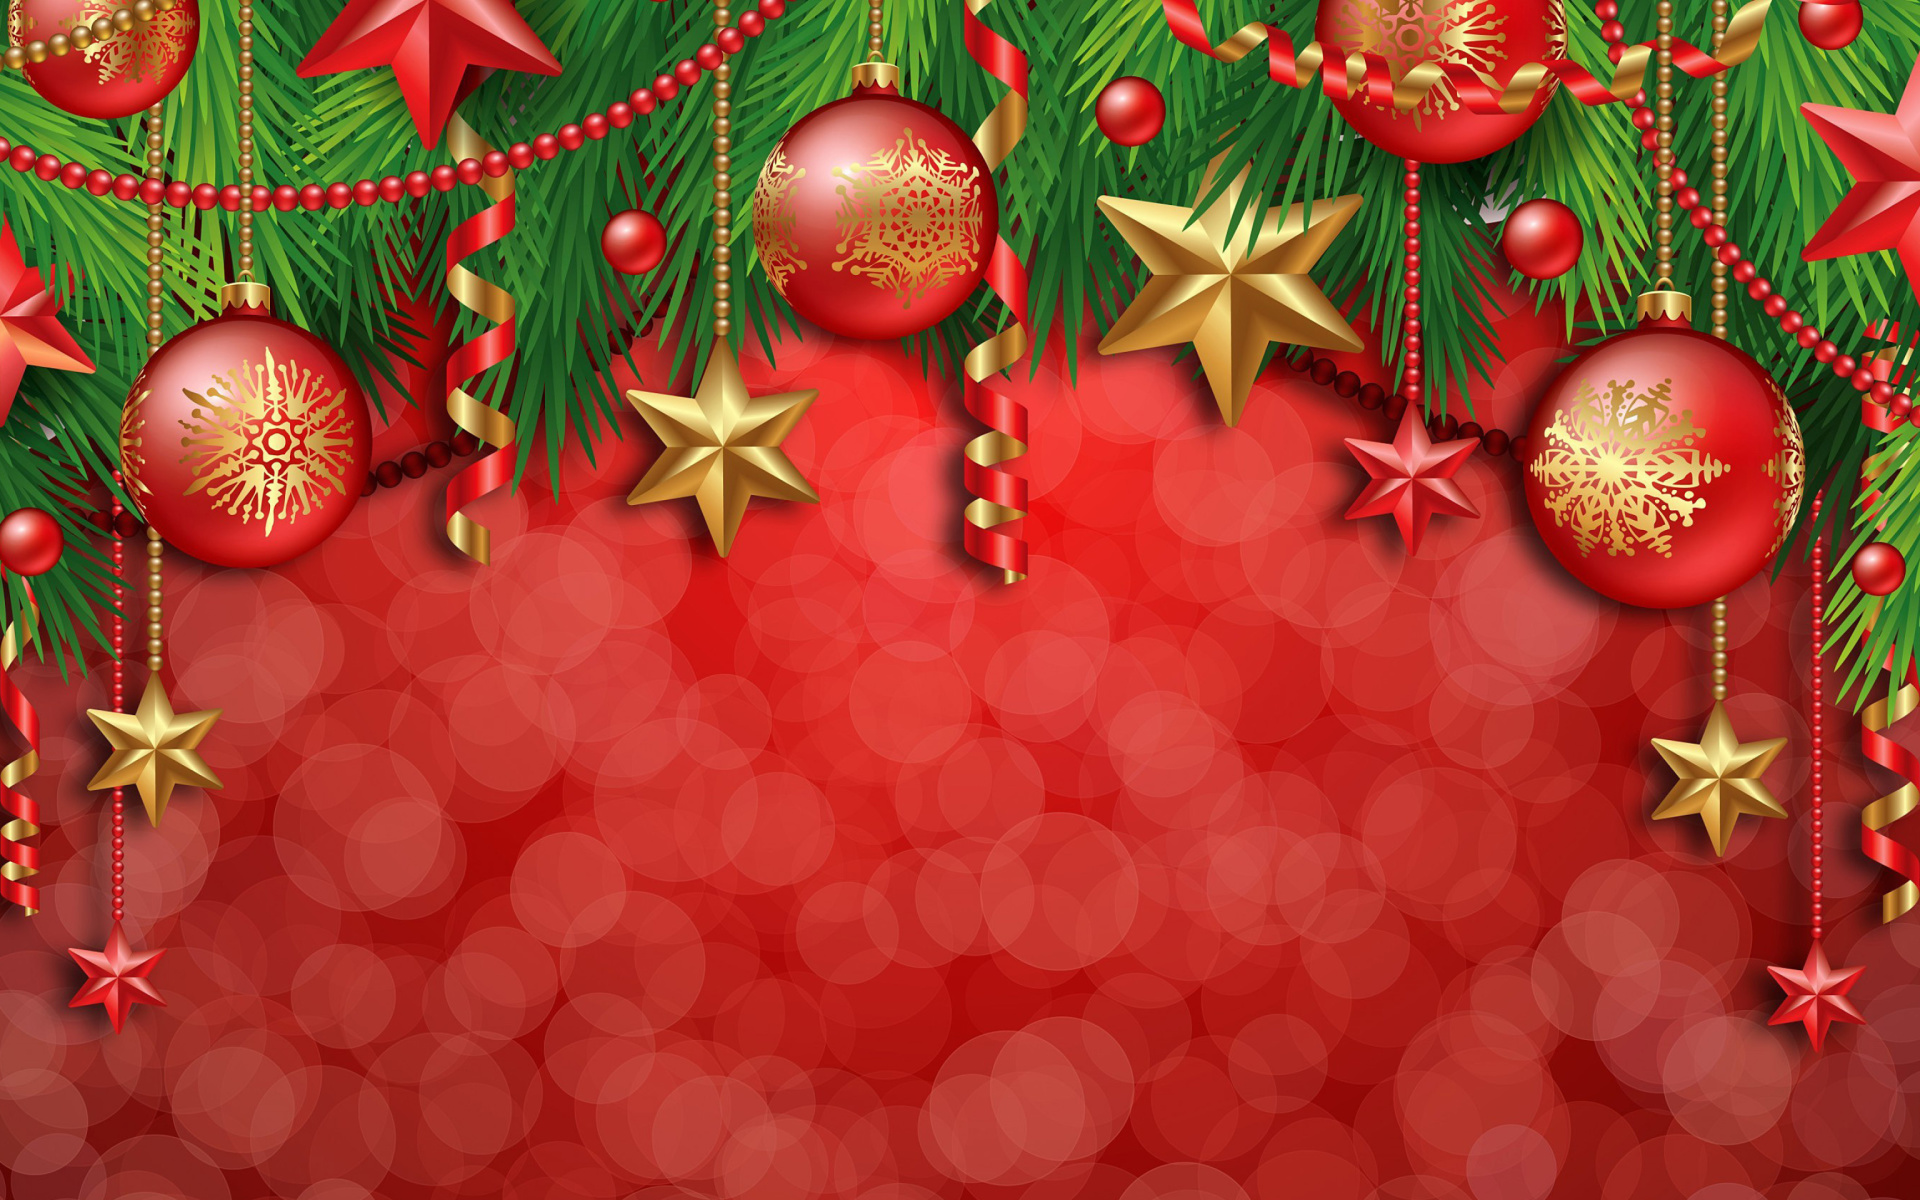 Red Christmas Decorations wallpaper 1920x1200